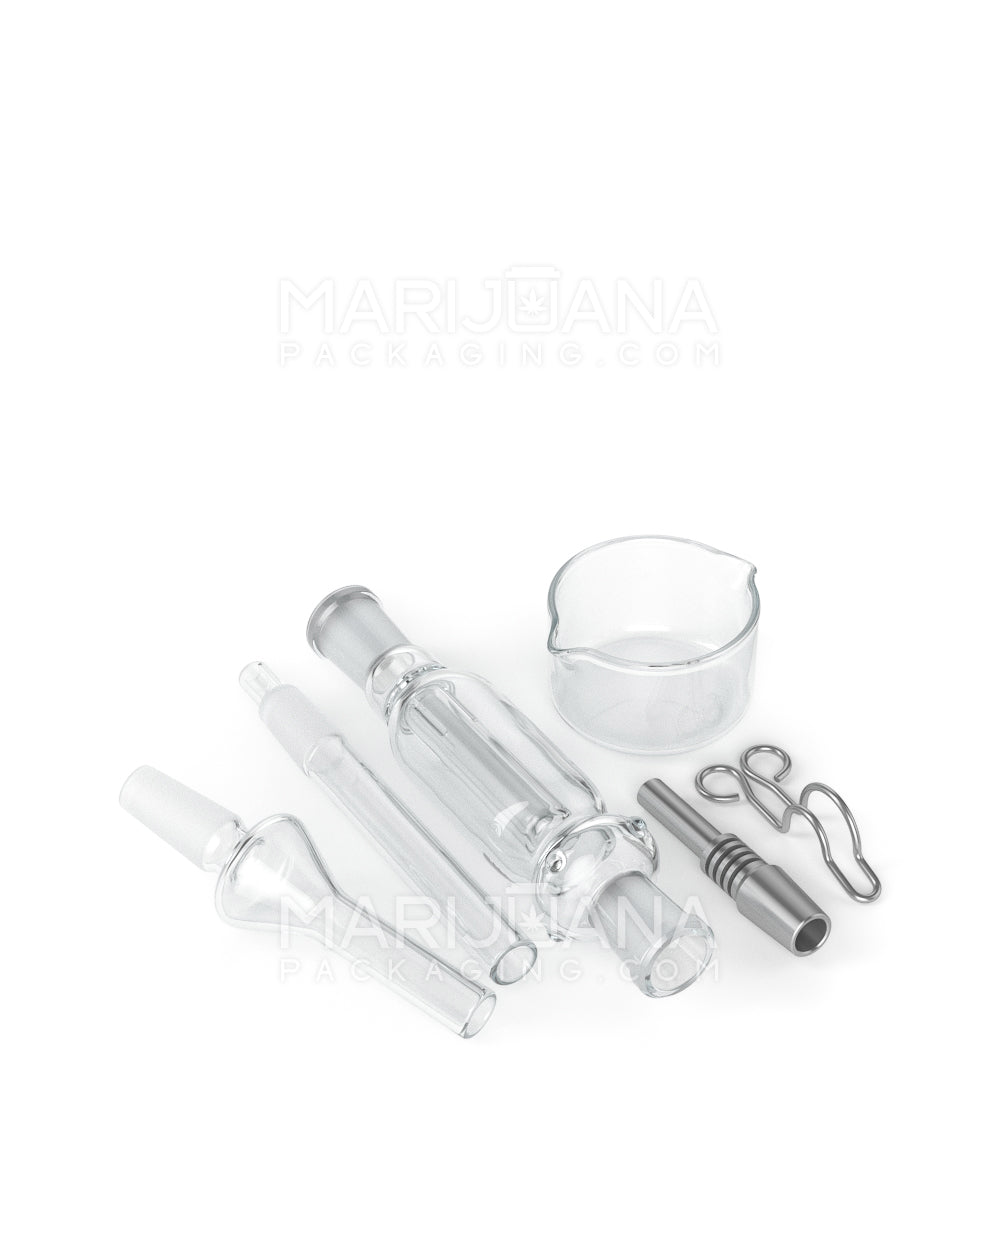 Nectar Collector Dab Pipe | 6in Long - 10mm Attachment - Clear - 3